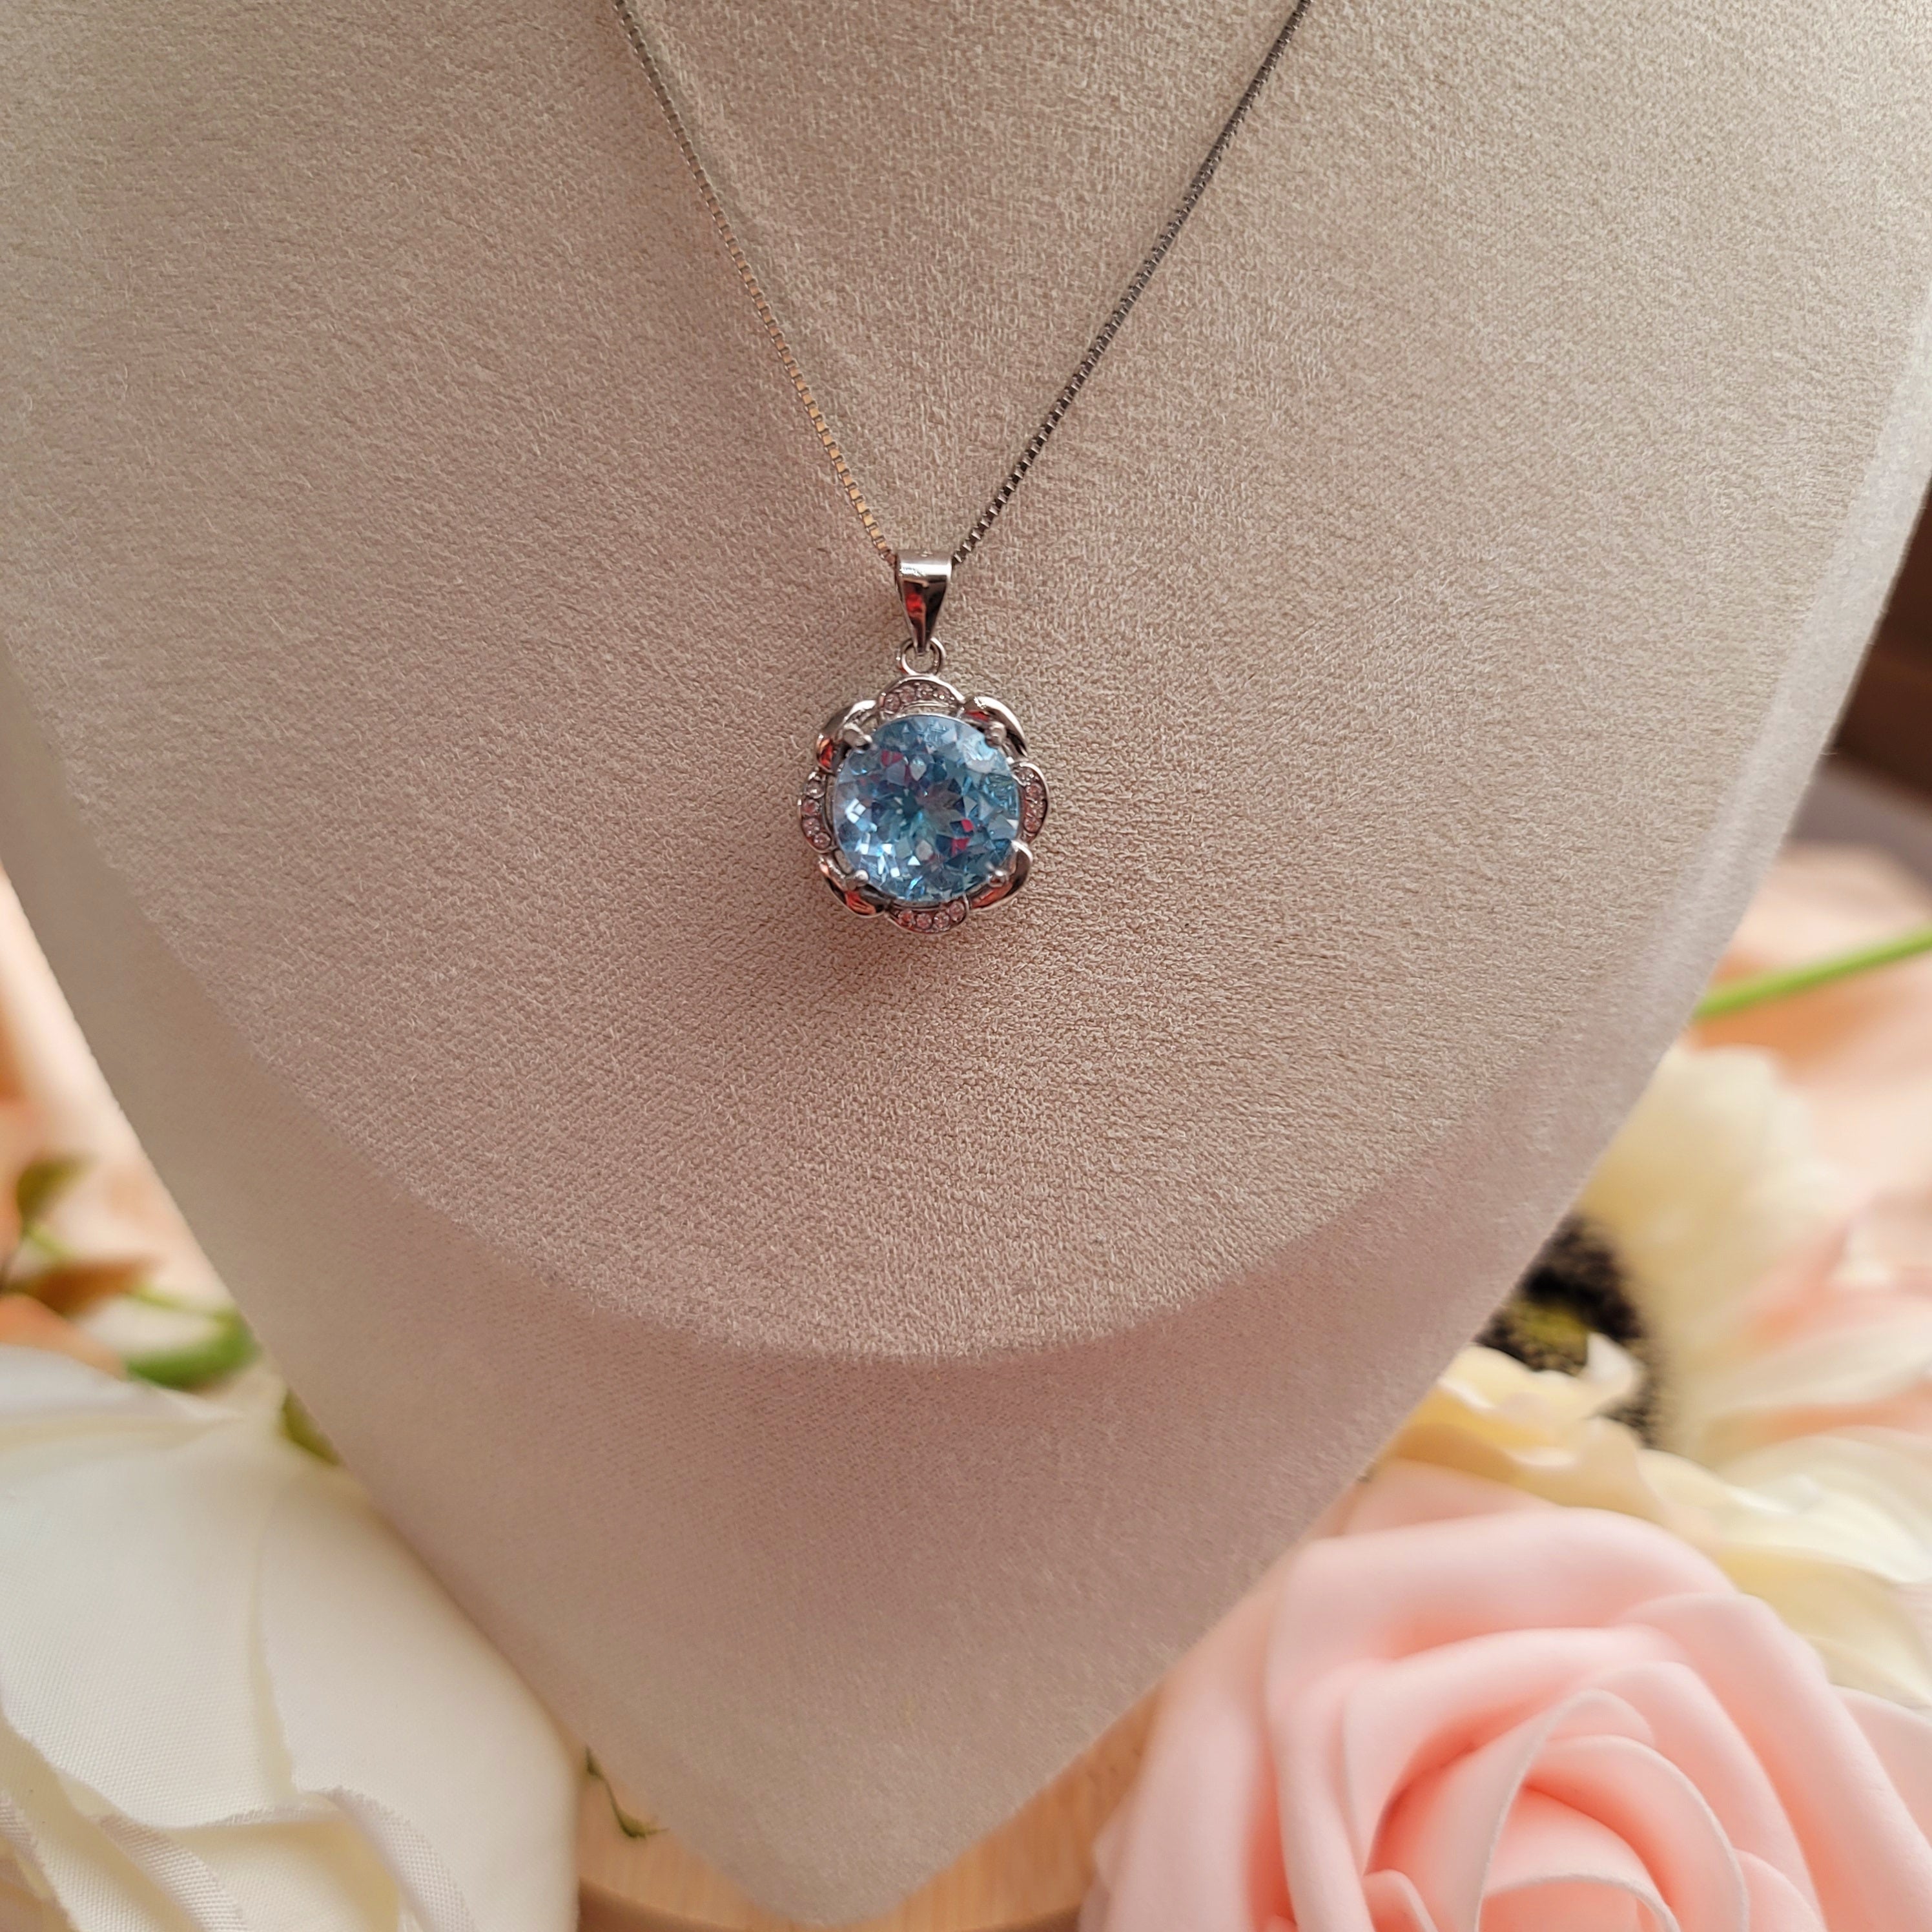 Blue Topaz Magestic Pendant for Awareness, Communication and Opportunities